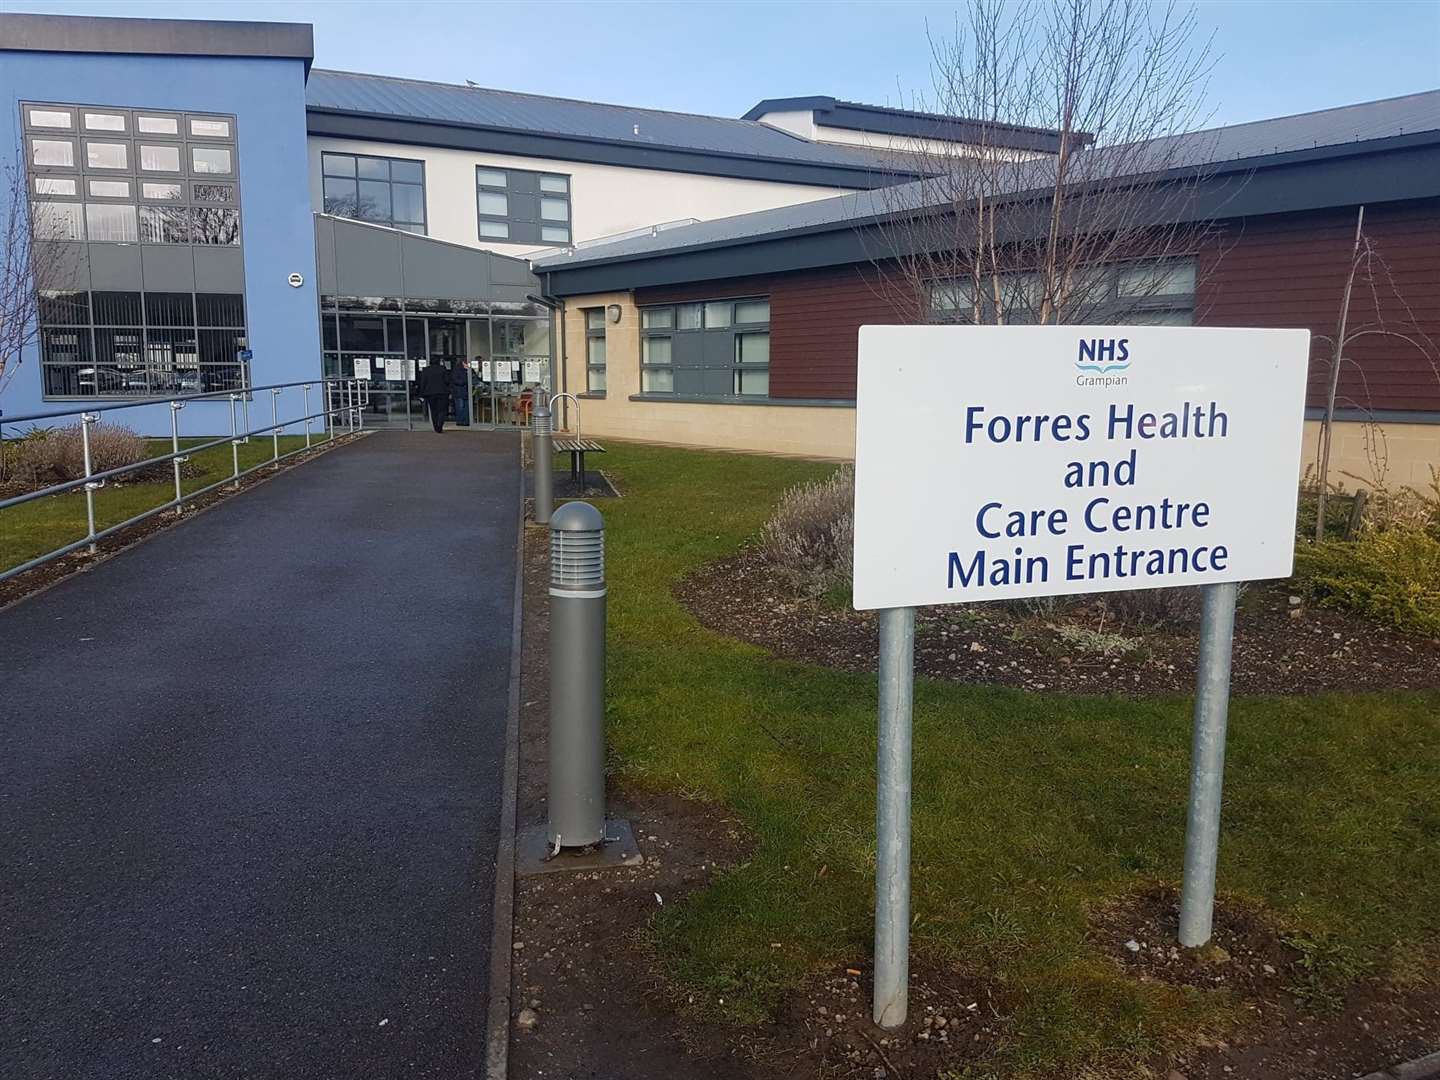 Forres Health and Care Centre was very busy on Saturday and Sunday.